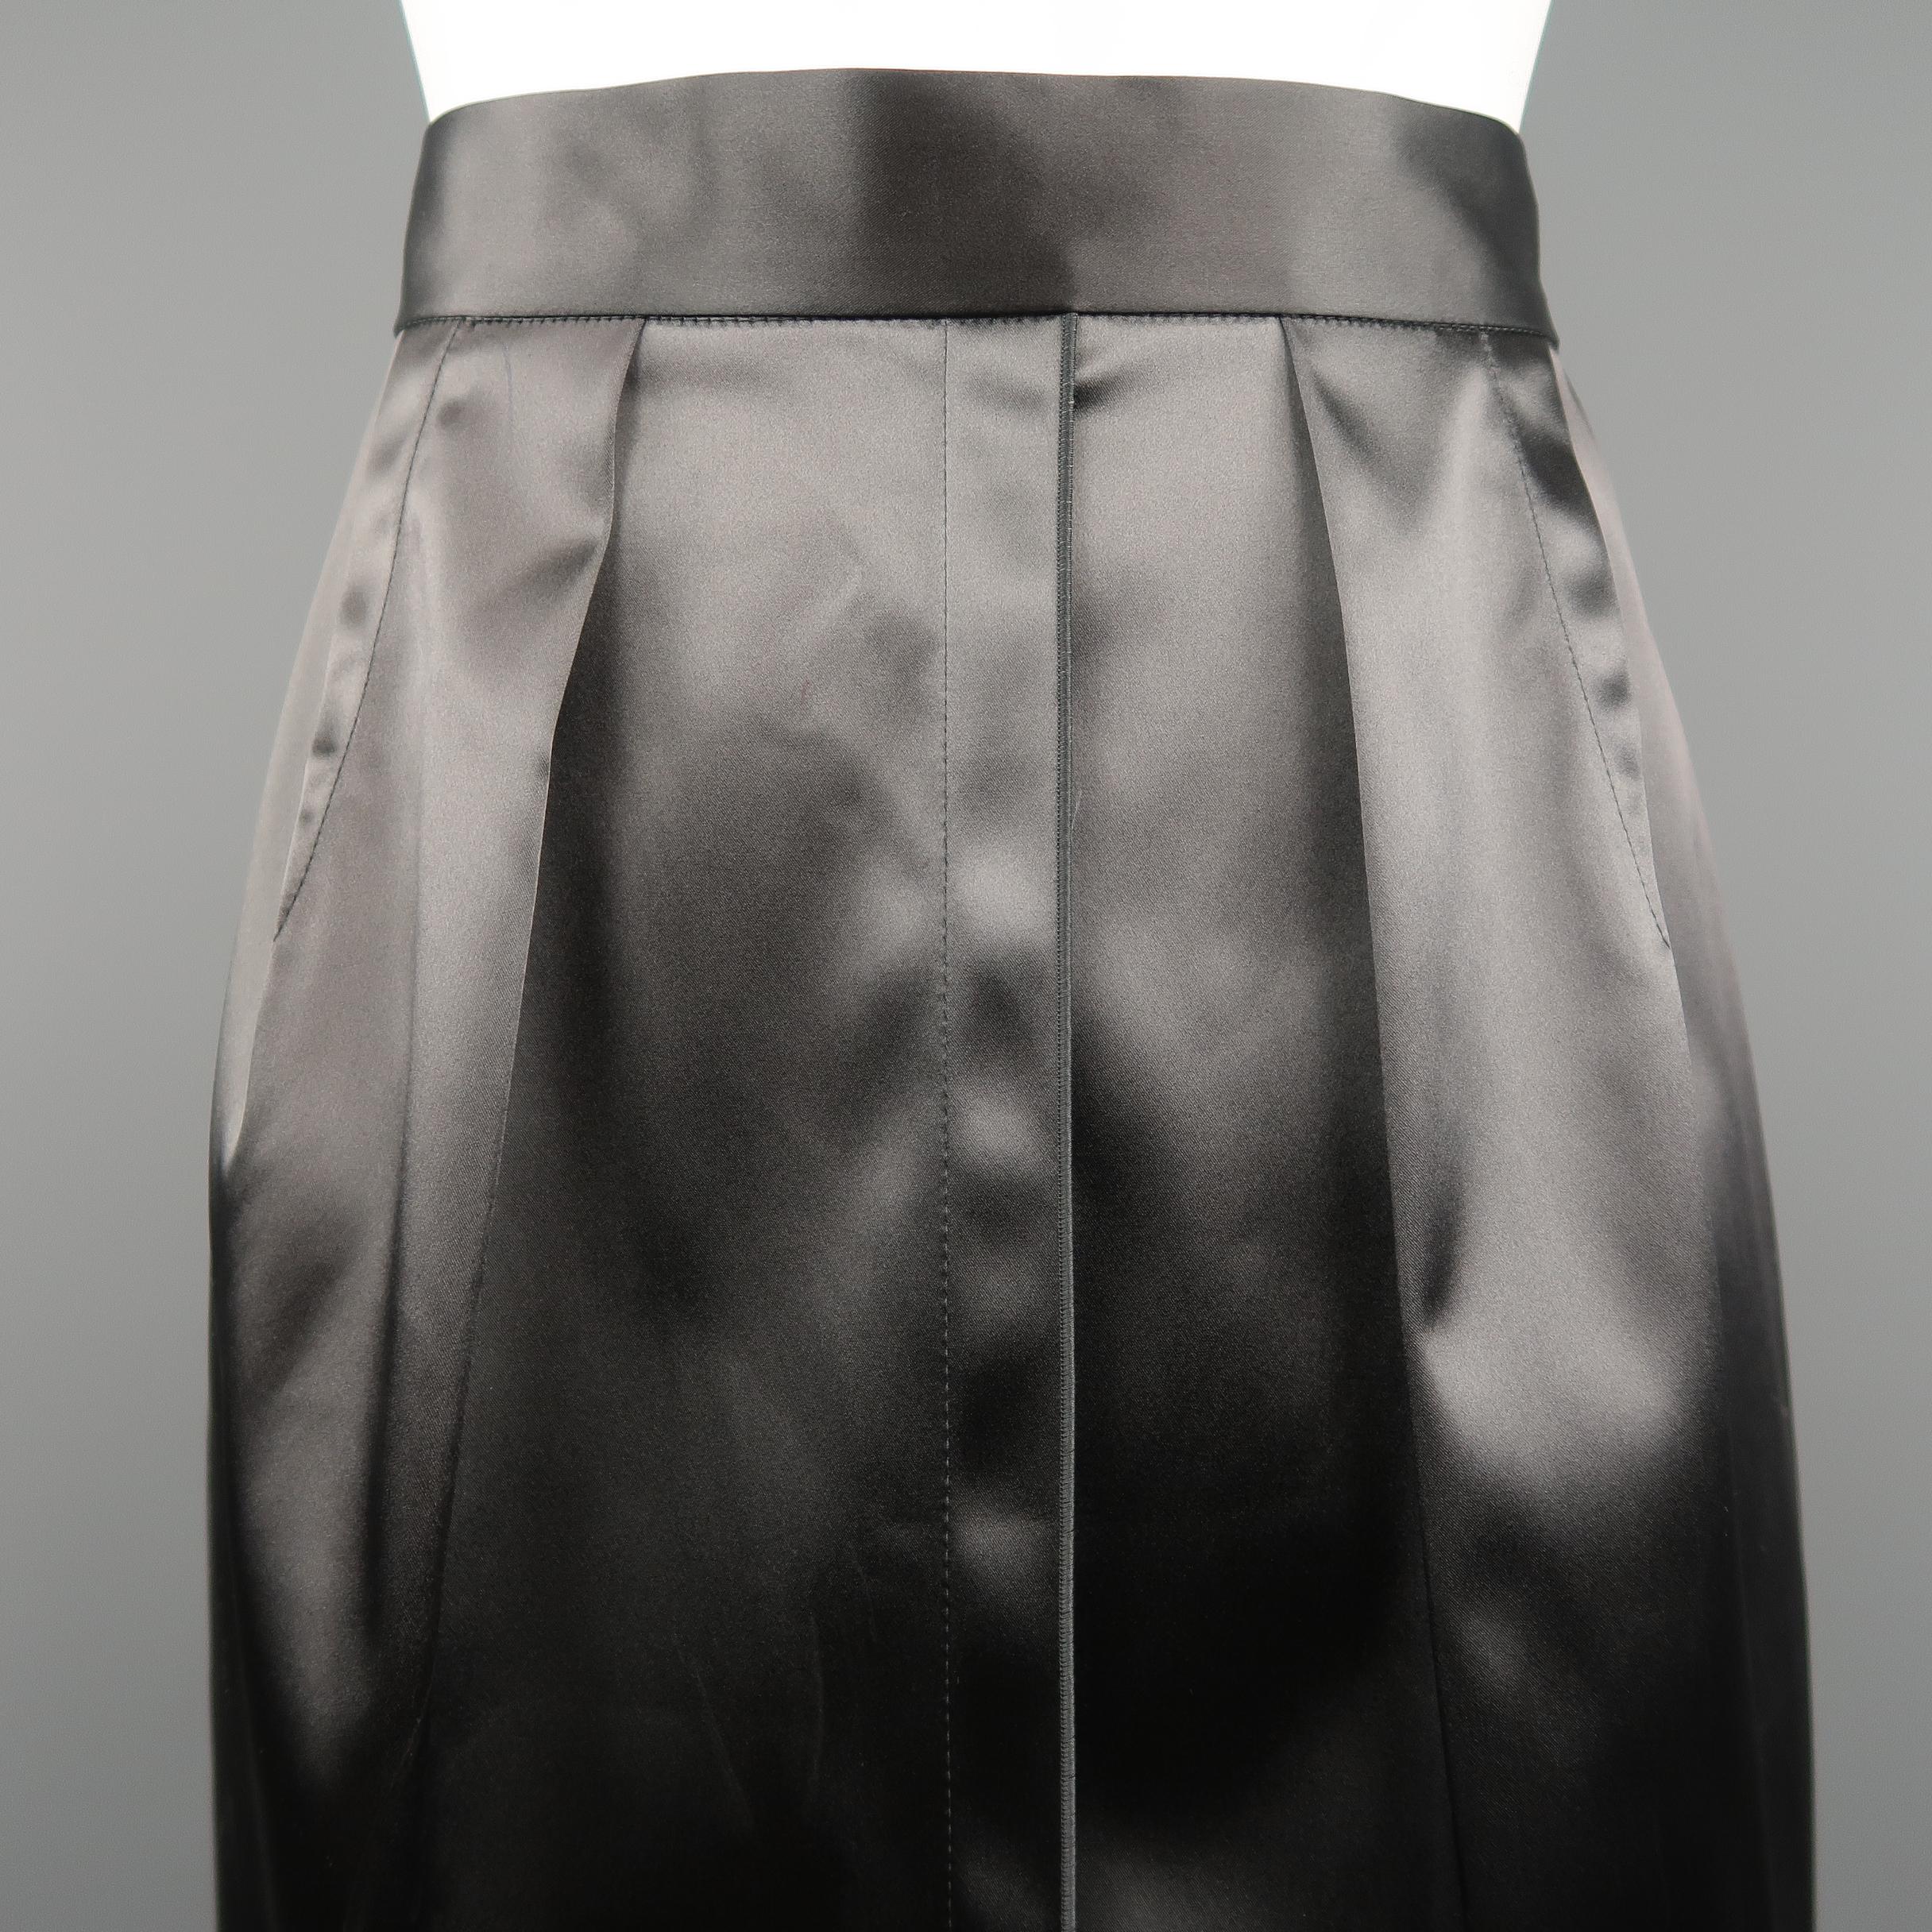 DOLCE & GABBANA pencil skirt come sin stretch satin with a high rise, pleated darts, and back zip. Made in Italy.
 
New with Tags.
Marked: IT 40
 
Measurements:
    Waist: 26 in.
    Hip: 38 in.
    Length: 25 in.